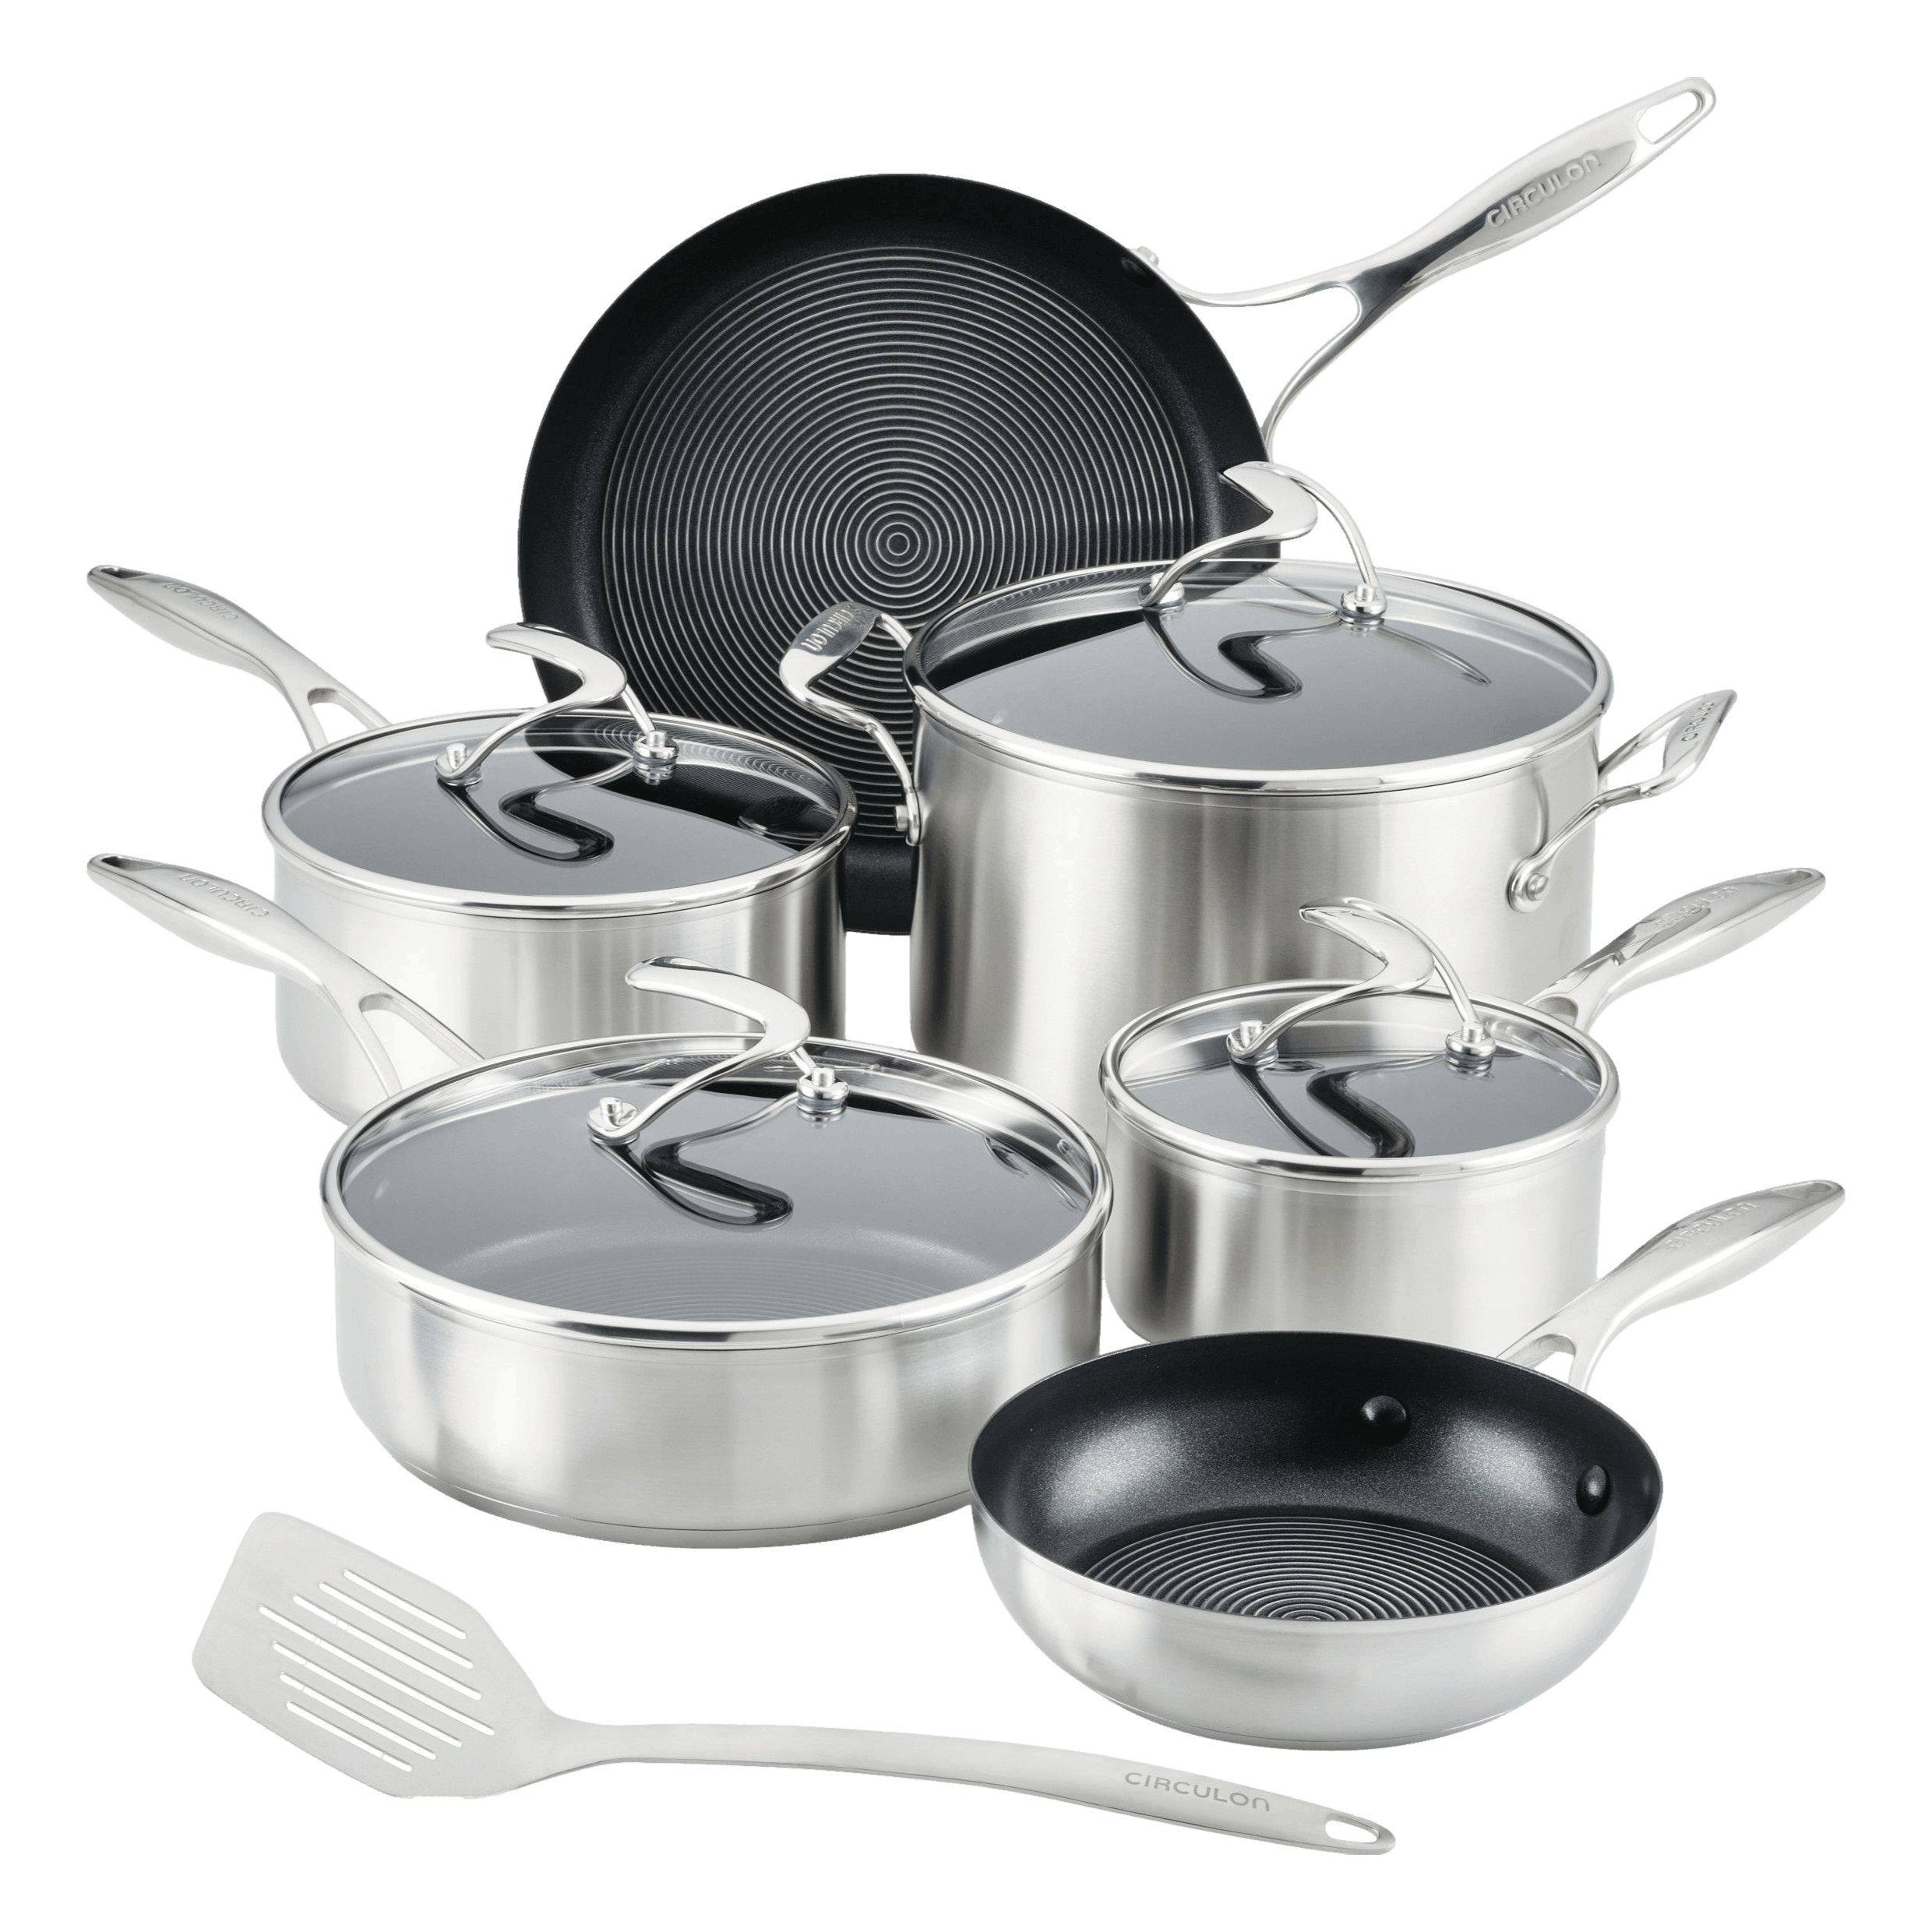 In-Depth Product Review: KitchenAid KCH112KLKD Hard Anodized